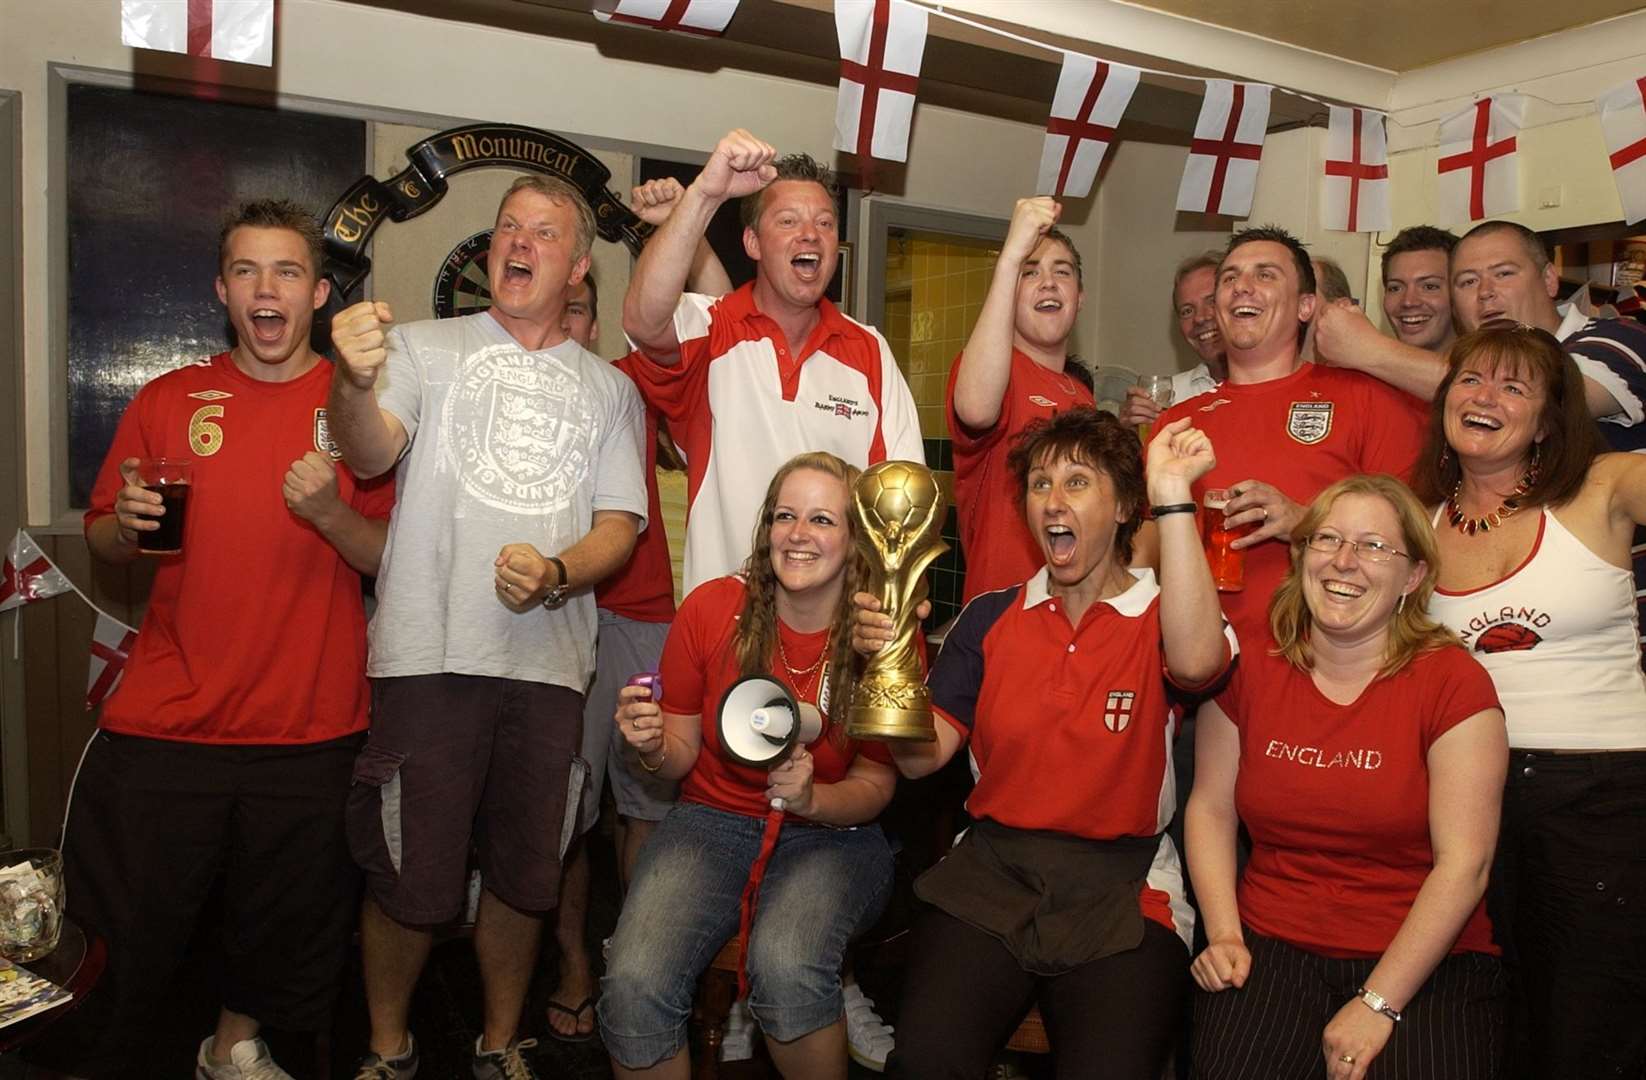 Fans watching the England v Portugal match at the Monument, Whitstable, in 2006.